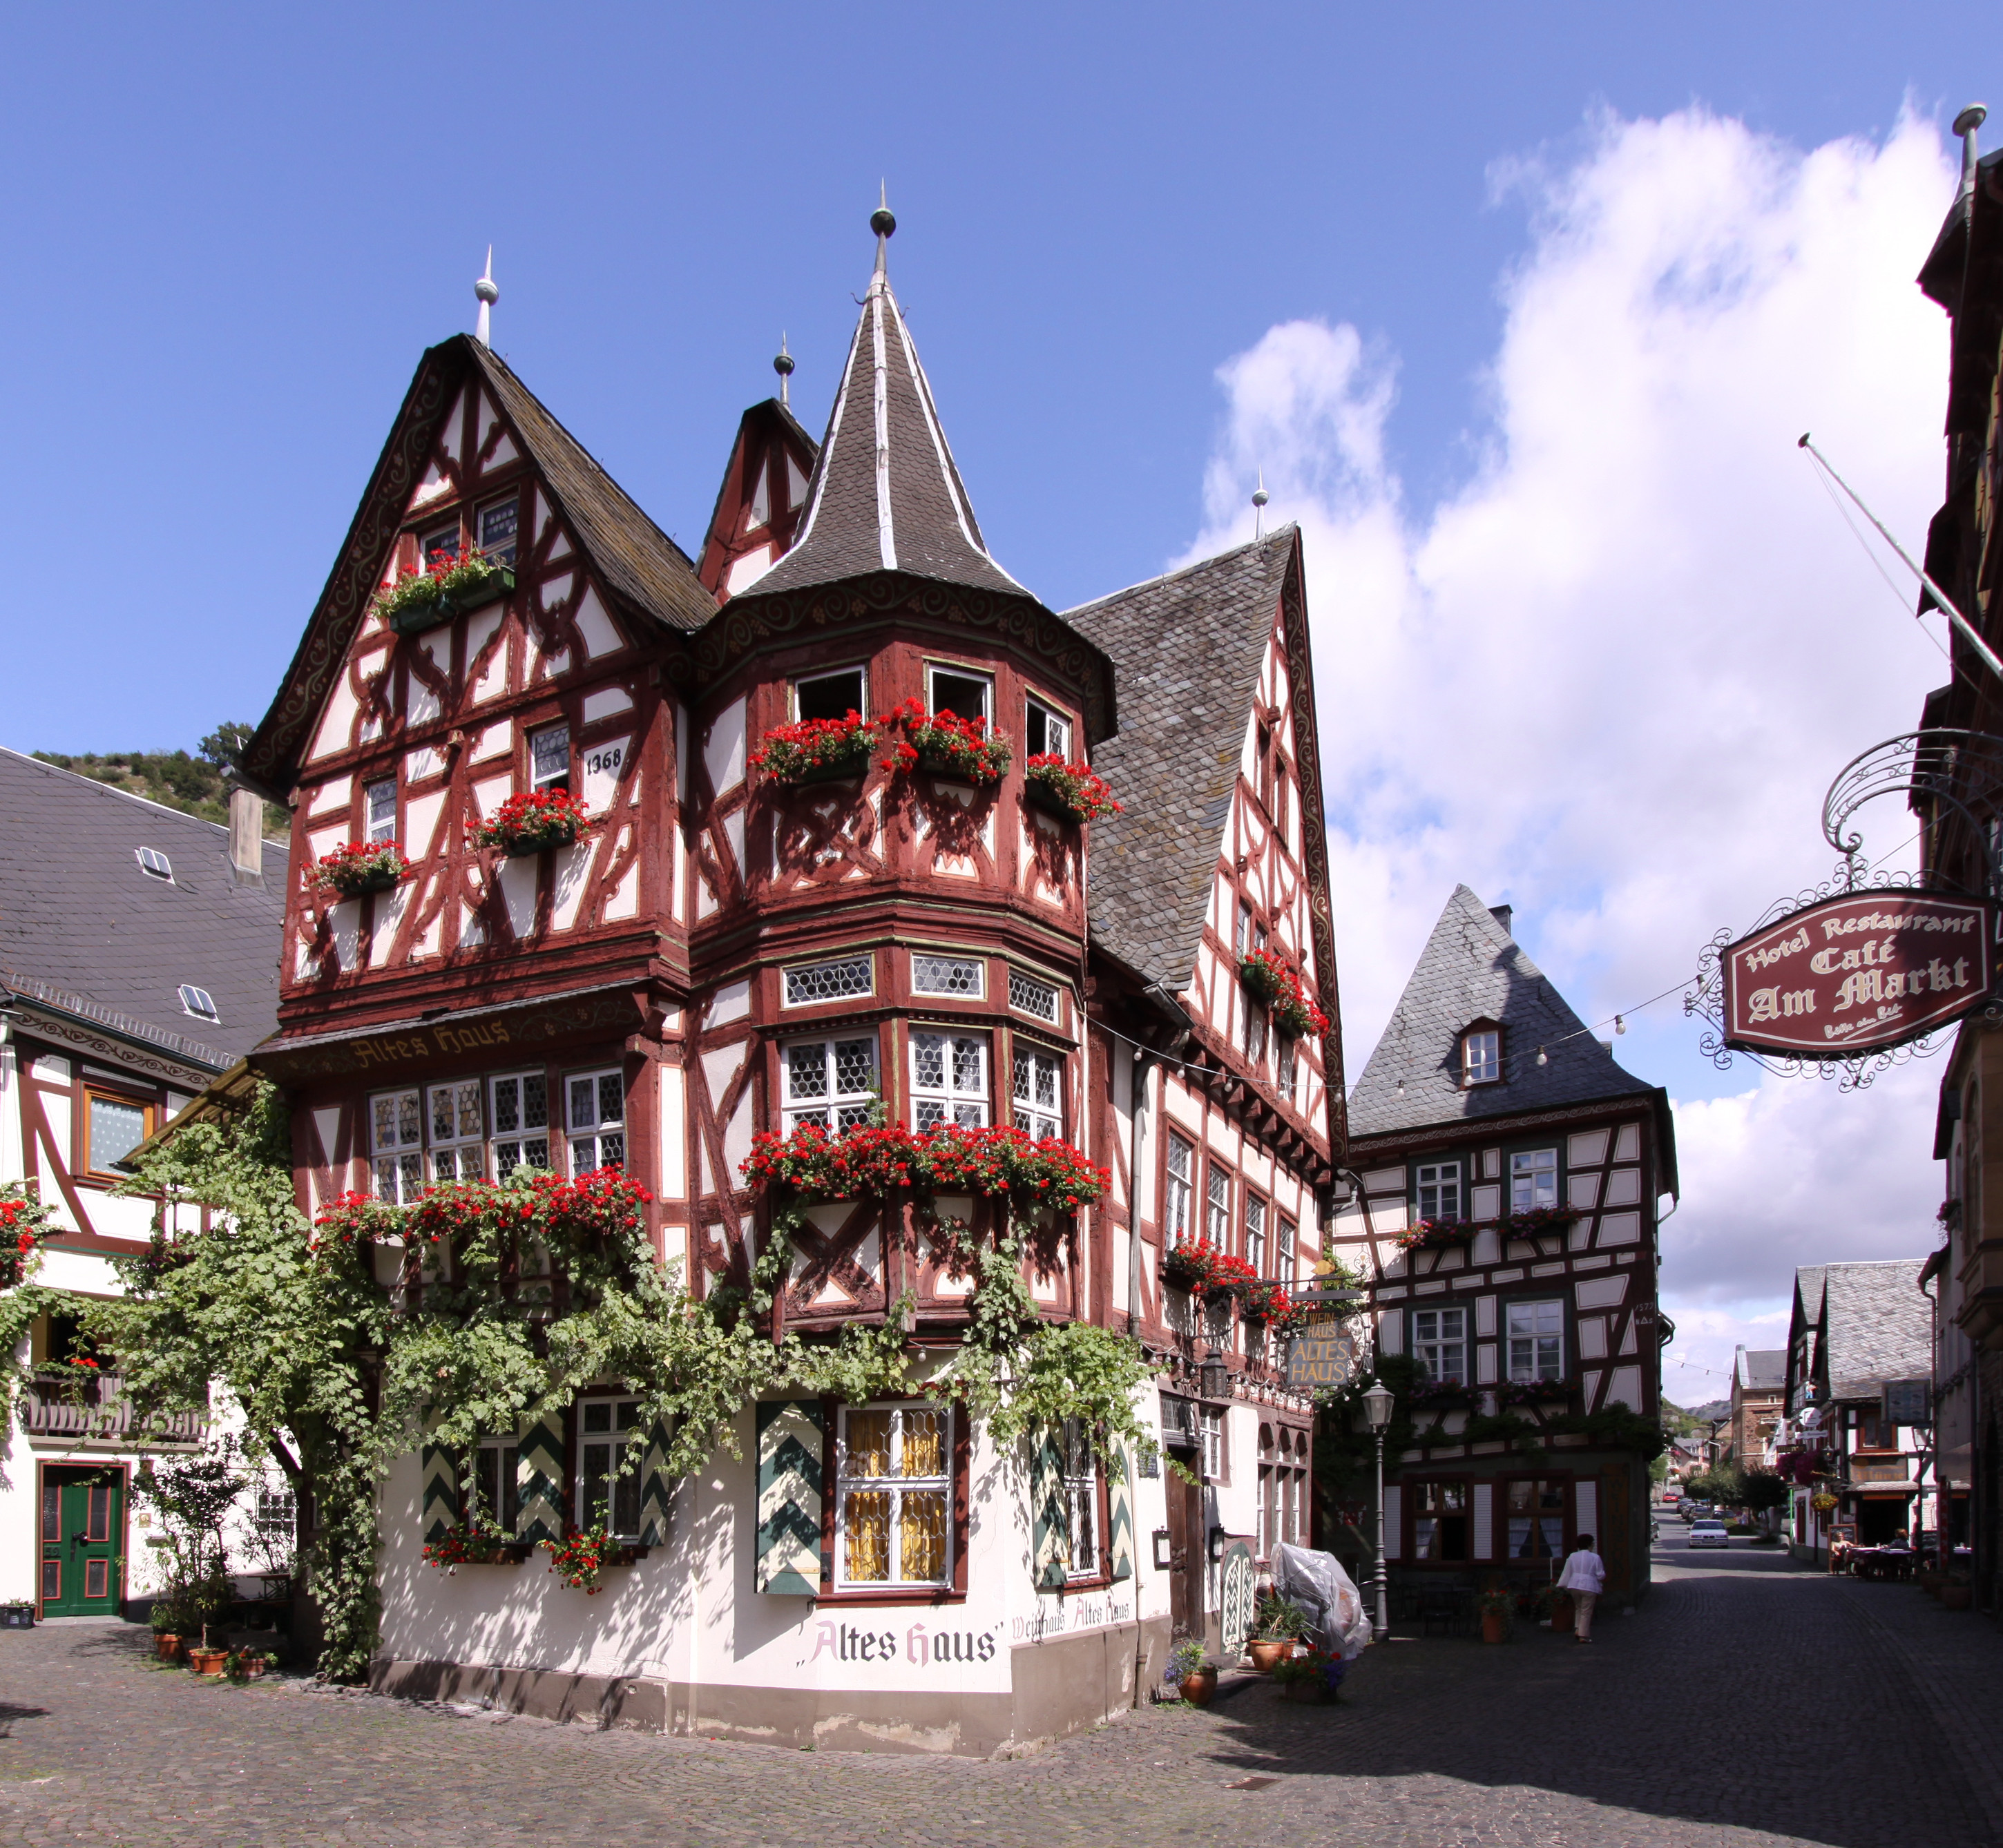 Altes Haus
 "Altes Haus" in Bacharach